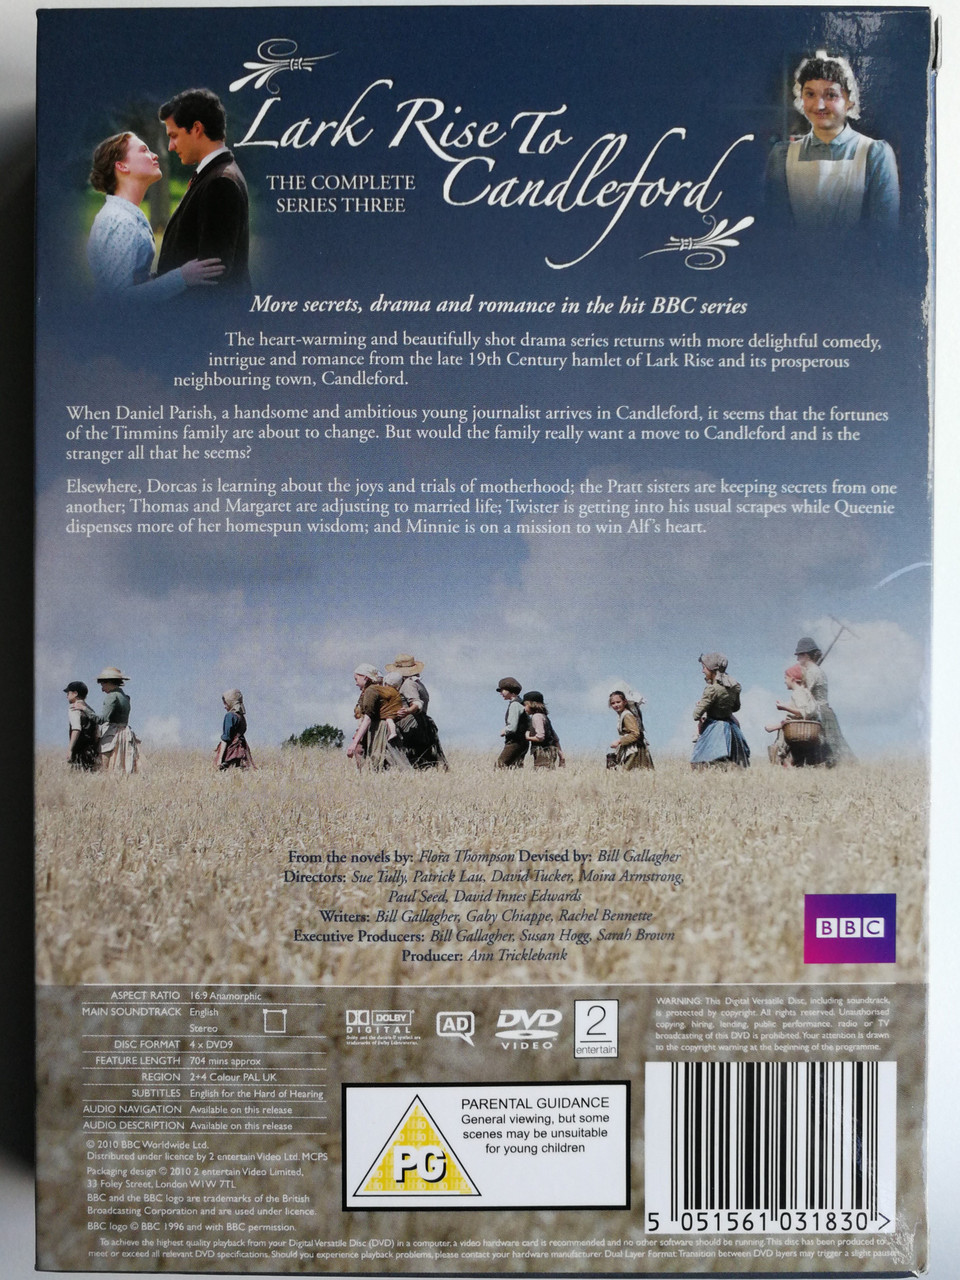 Lark Rise To Candleford DVD The Complete Series Three / 4 Disc Set BBC /  Directed by Sue Tully, Patrick Lau, David Tucker, Moira Armstrong, Paul  Seed, David Innes Edwards / From